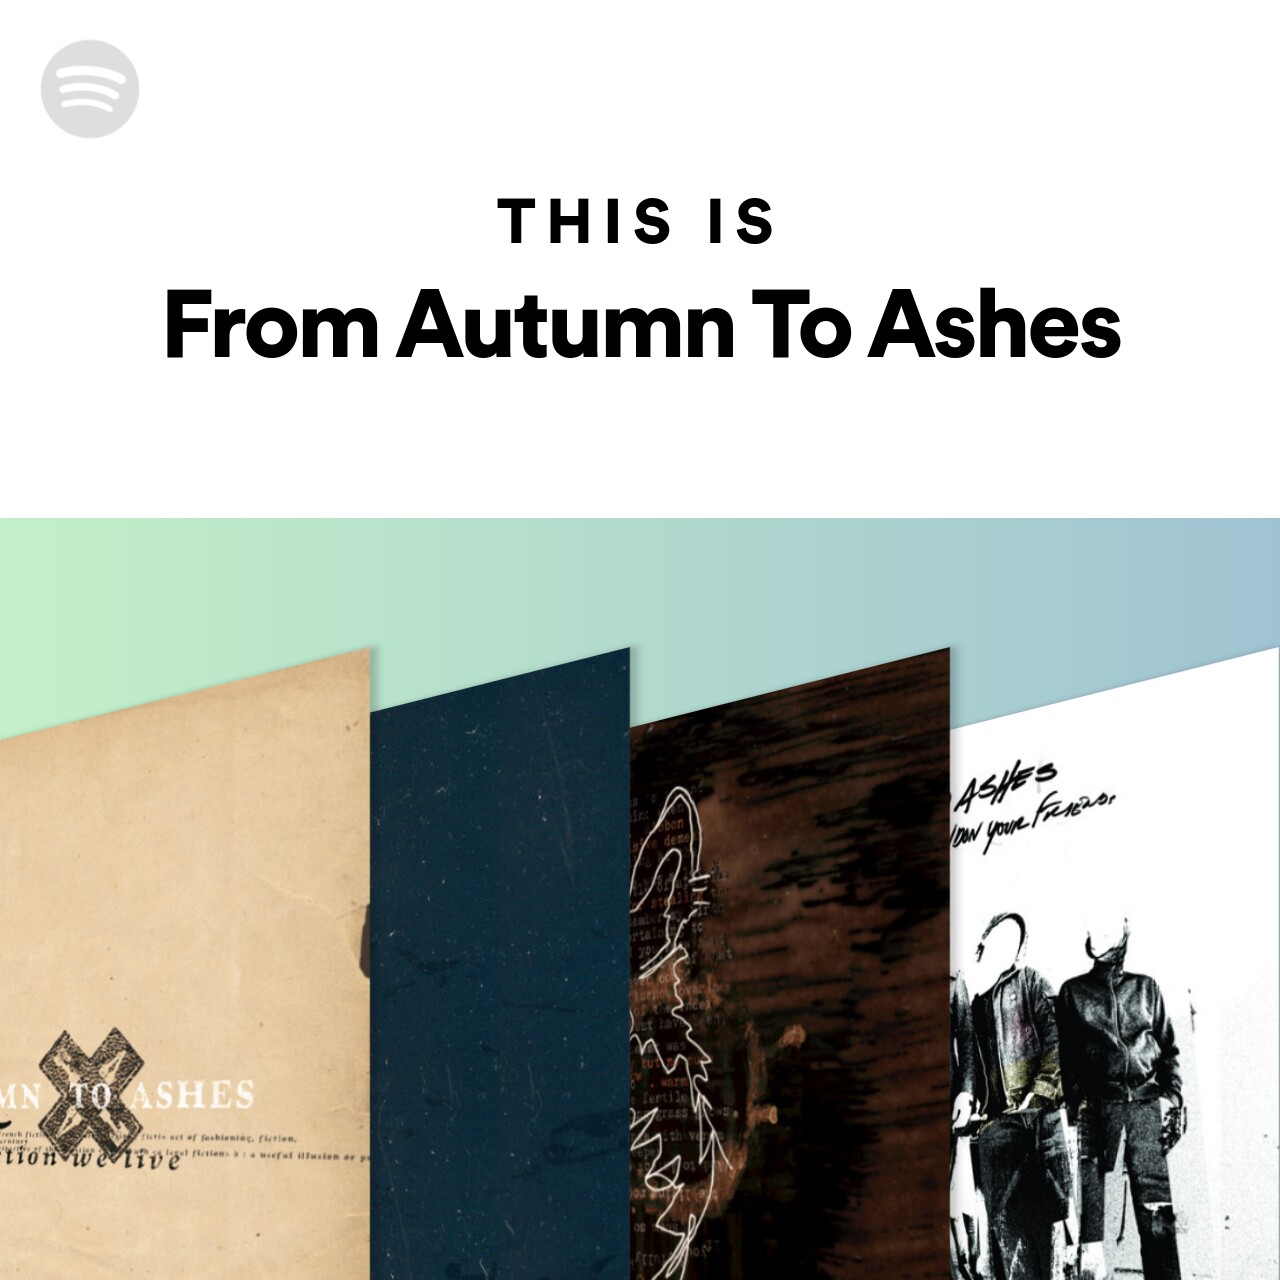 This Is From Autumn To Ashes